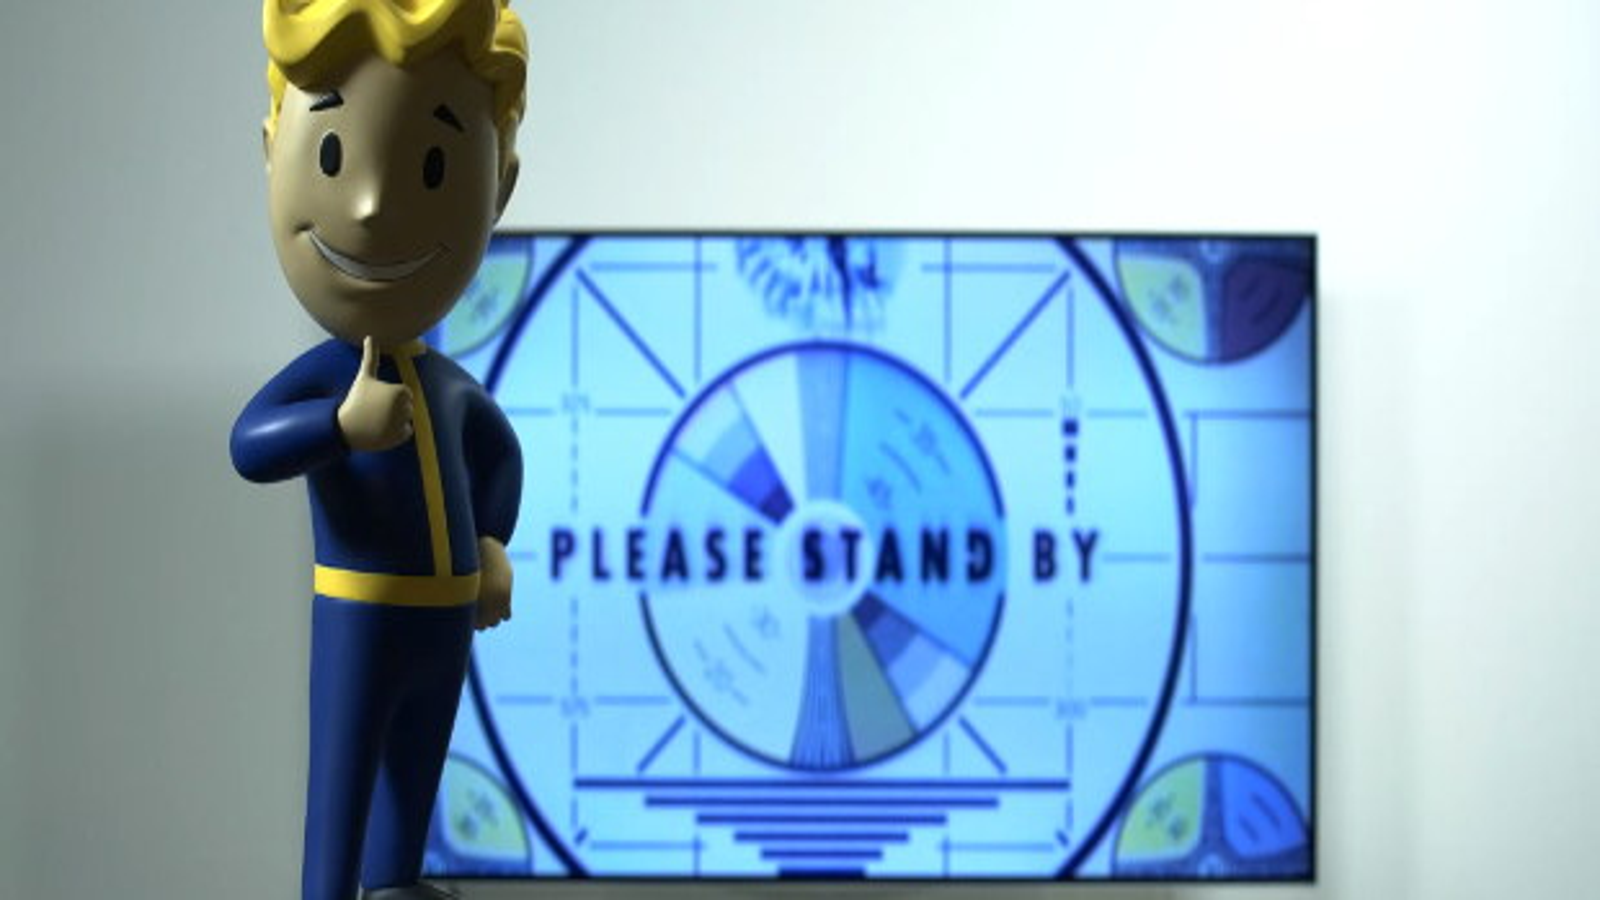 Fallout 3 Remaster rumoured to be coming to E3